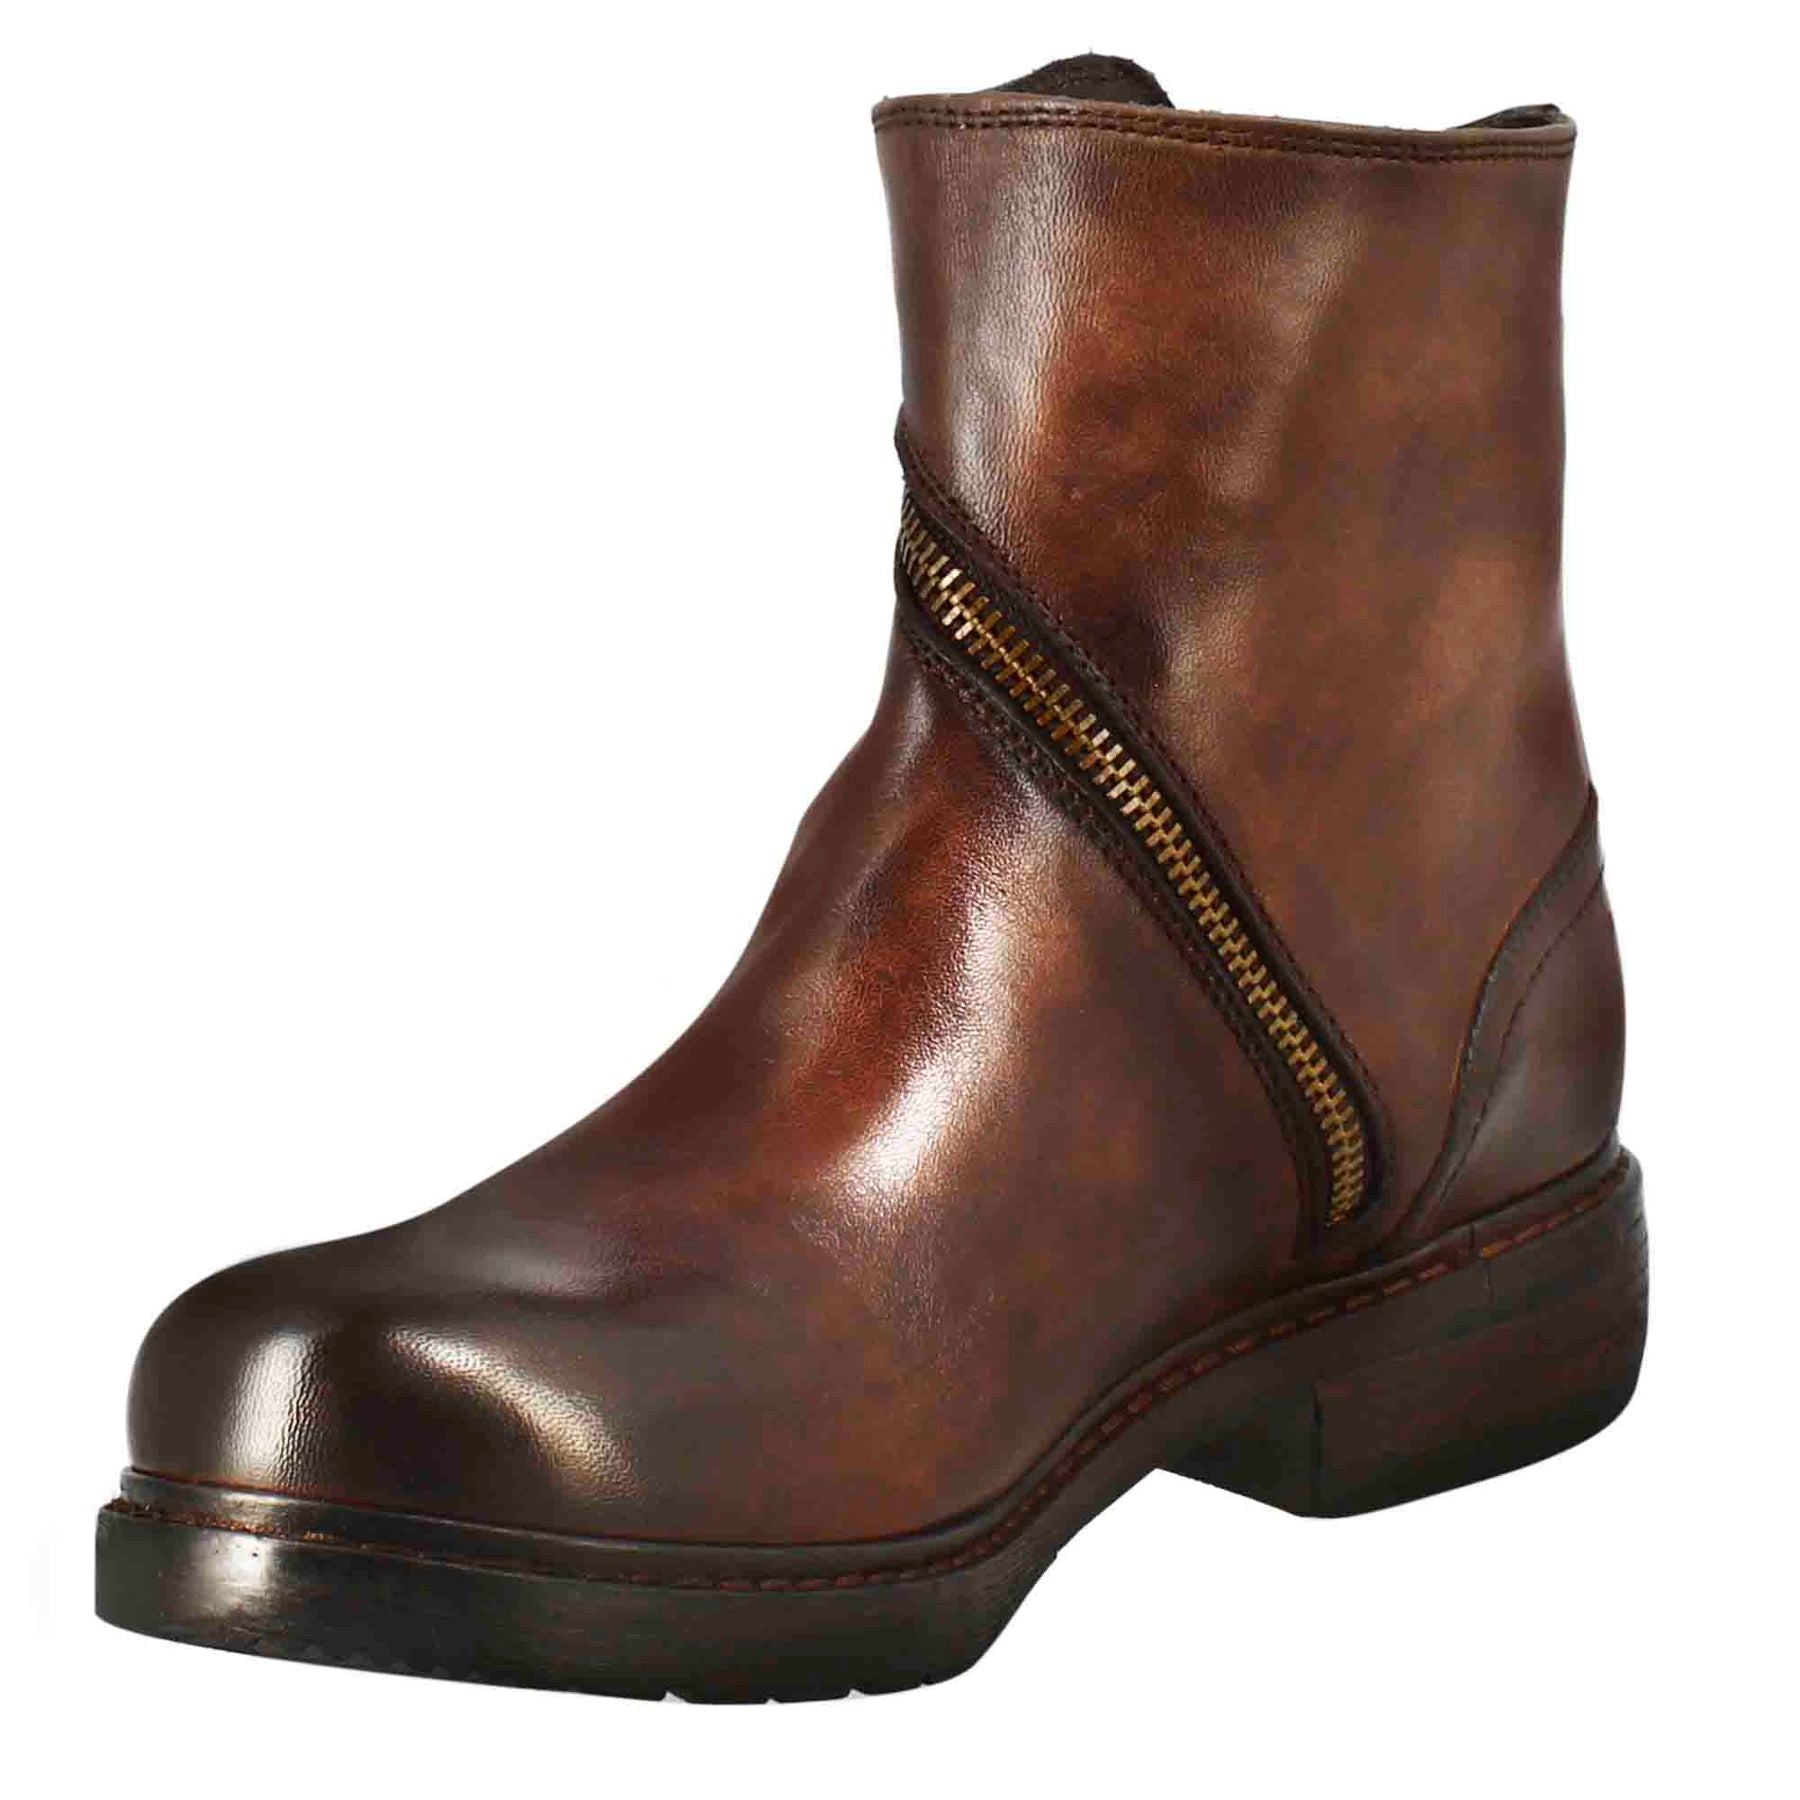 Paupa women's ankle boot in brown washed leather with double zip